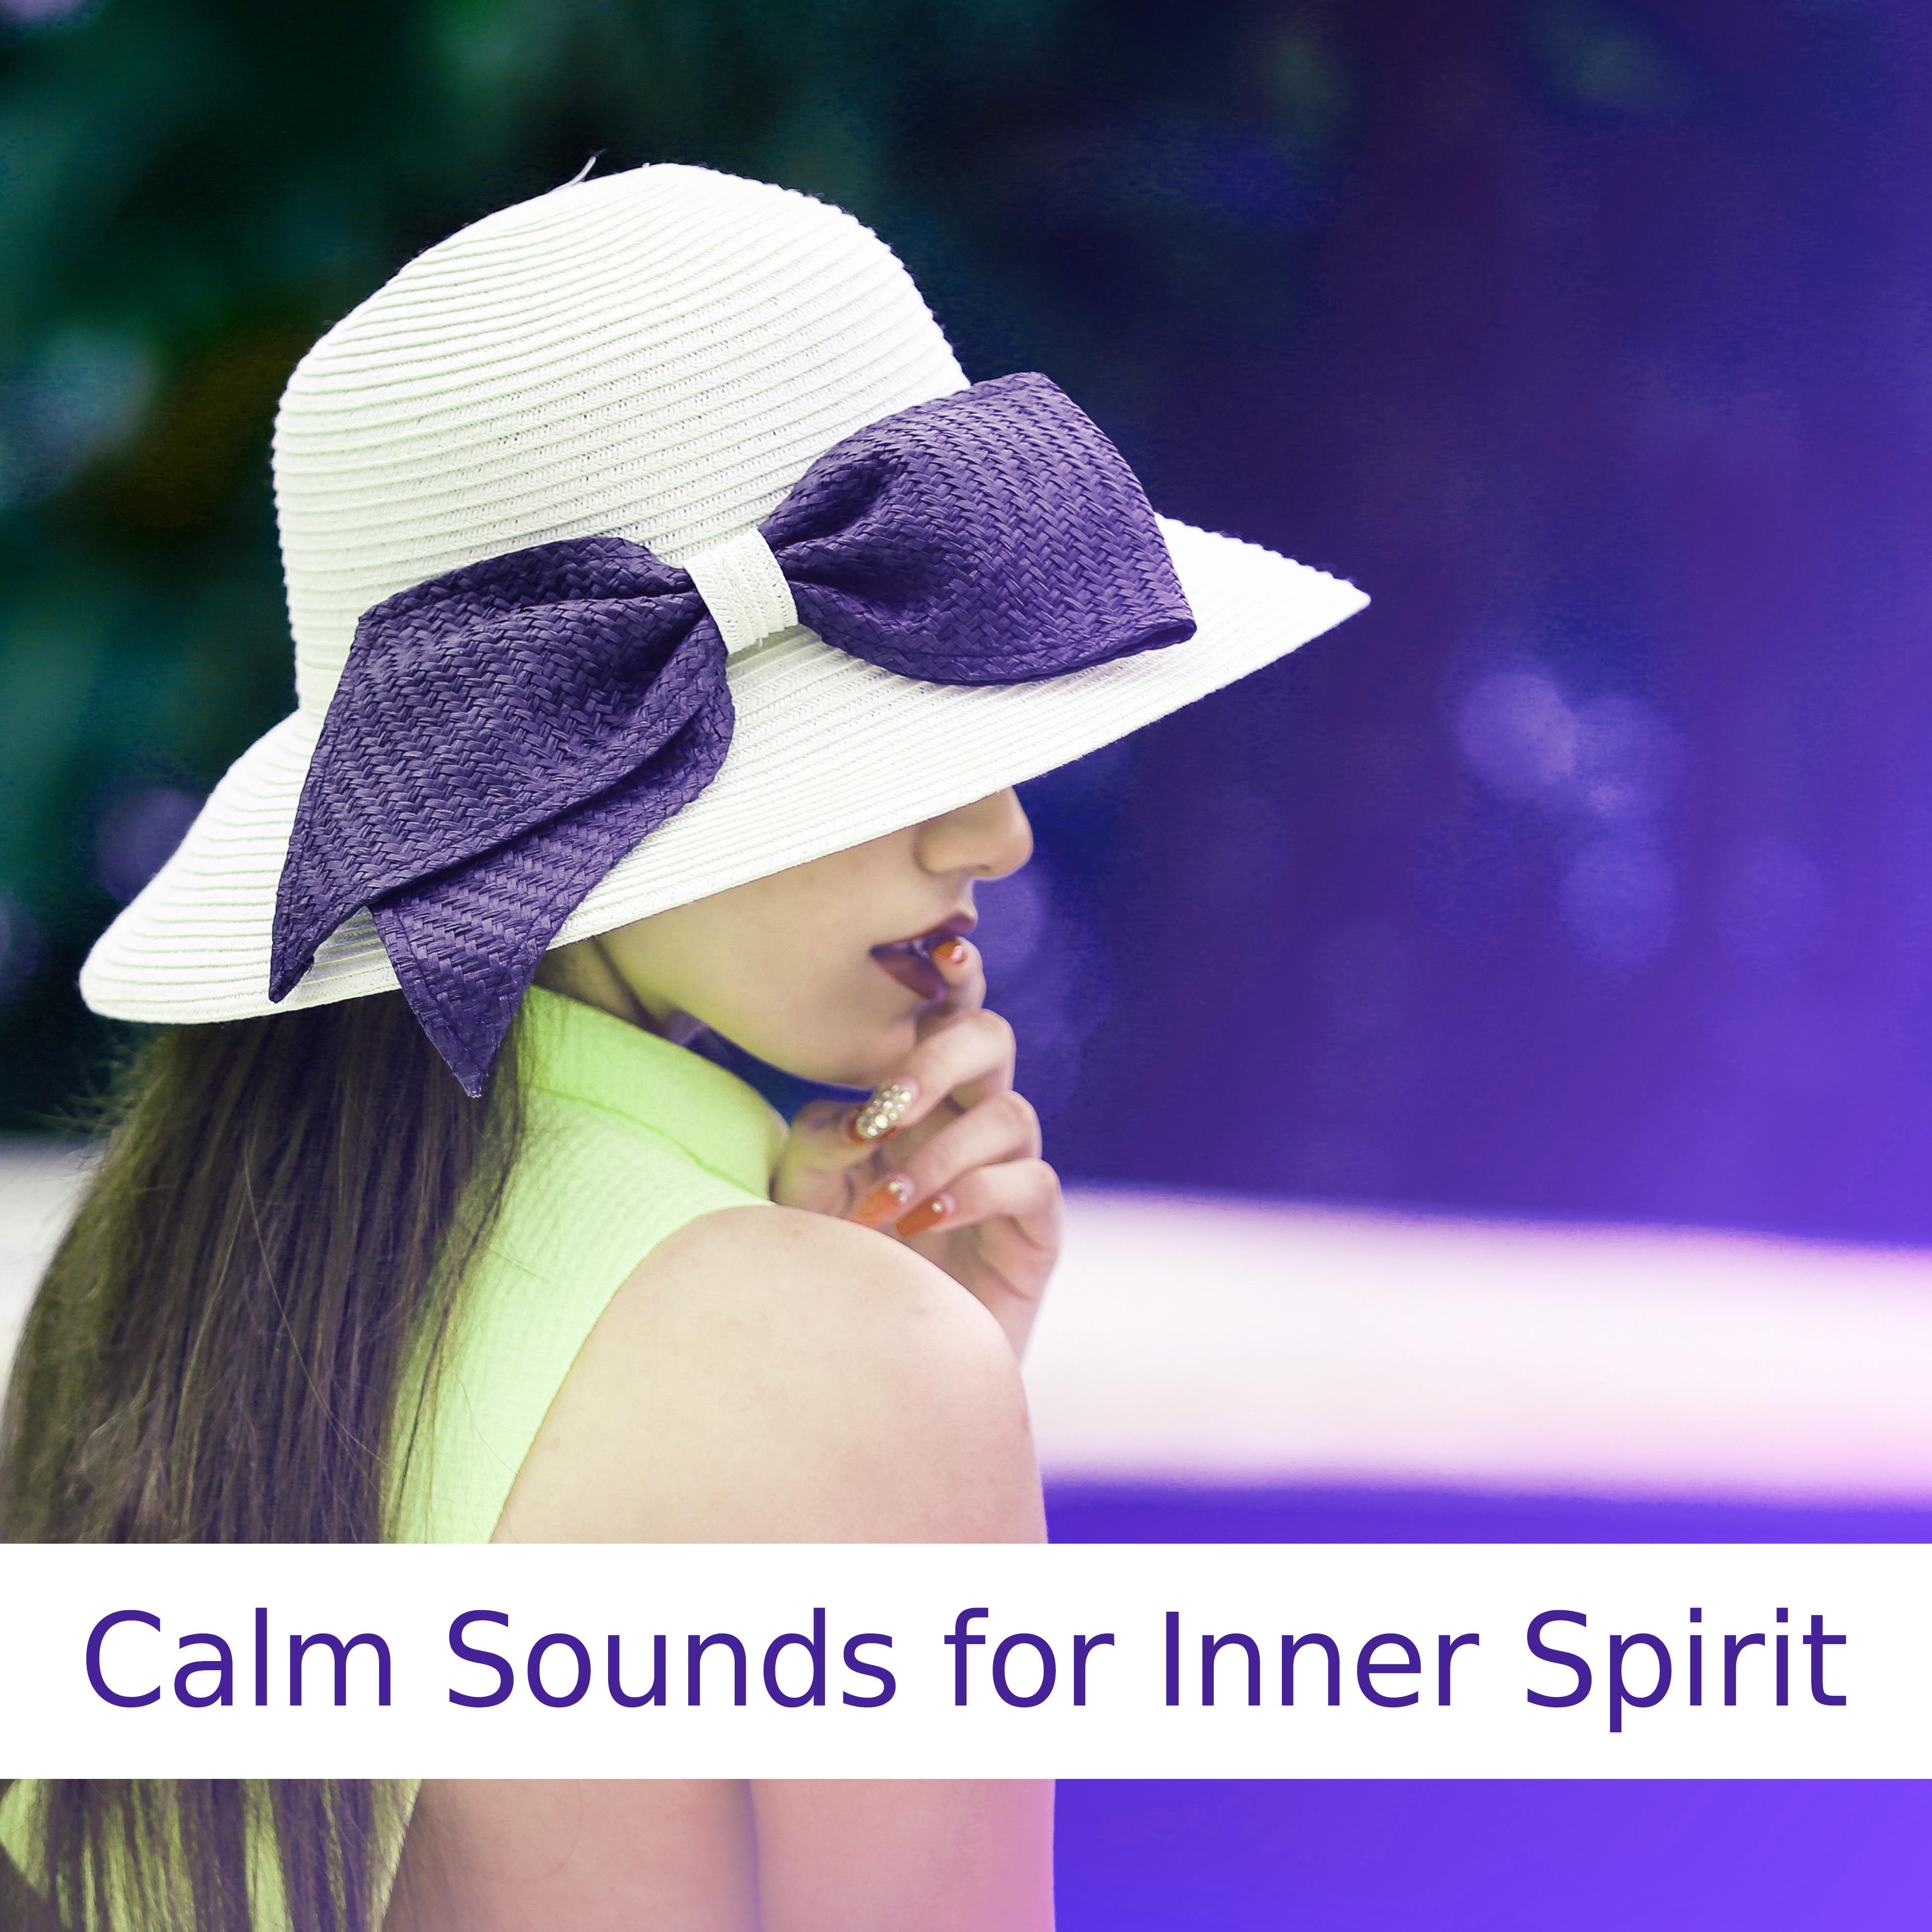 Calm Sounds for Inner Spirit – Chilled Sounds, Easy Listening, Piano Relaxation, New Age Rest